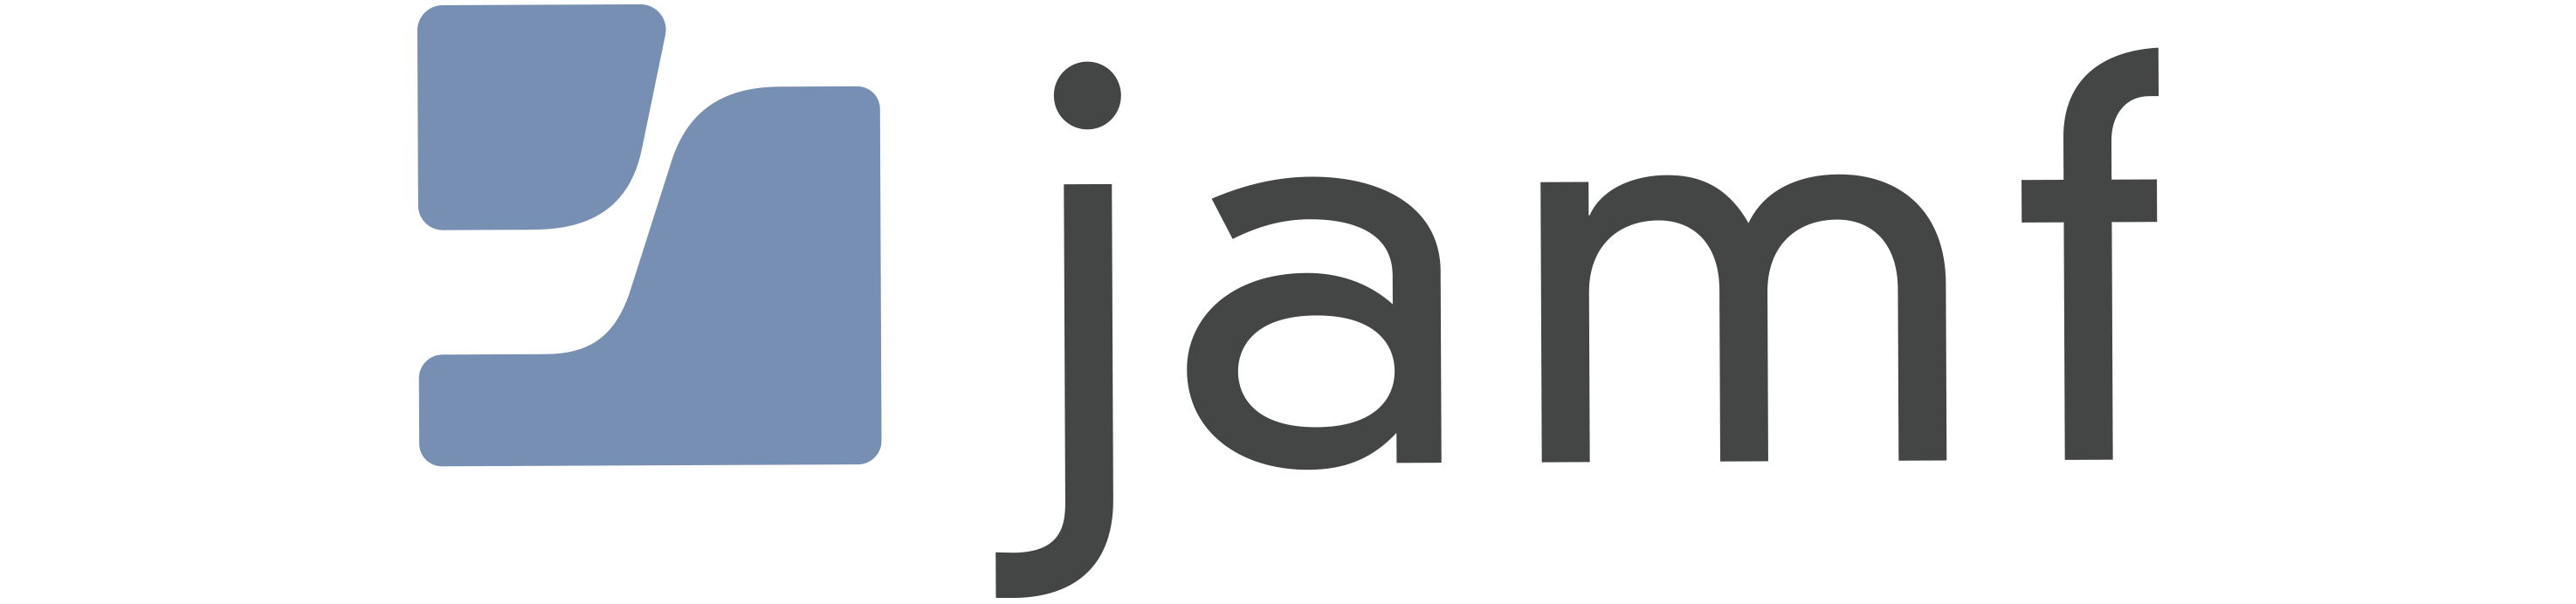 configuration profiles may only be created in jamf pro